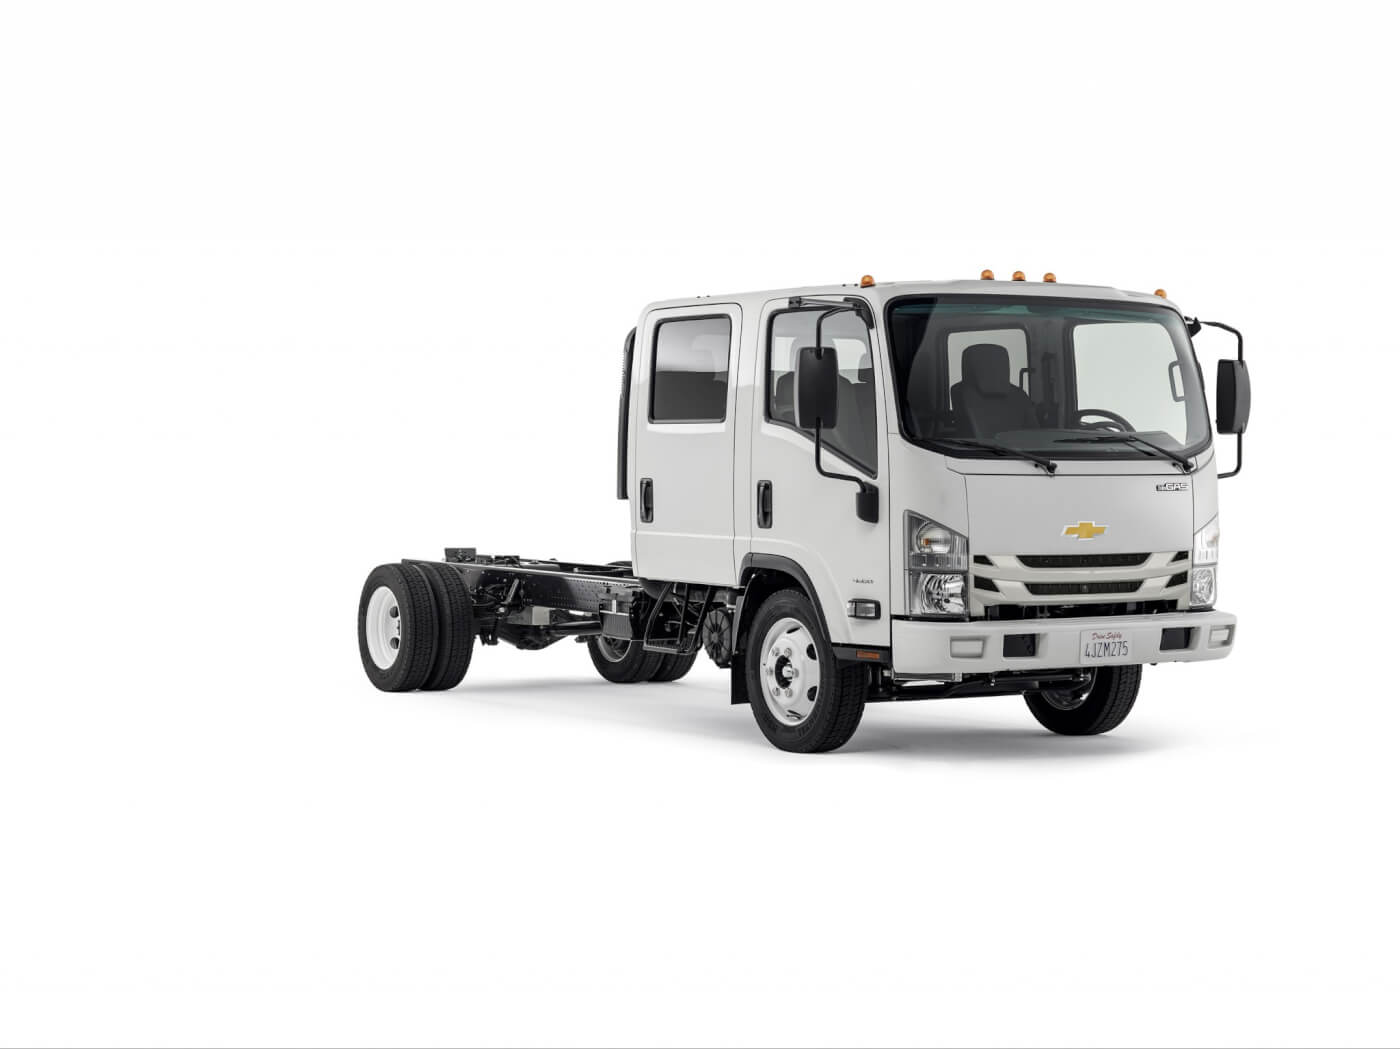 CHEVY RE-ENTERS THE LOW CAB FORWARD TRUCK MARKET